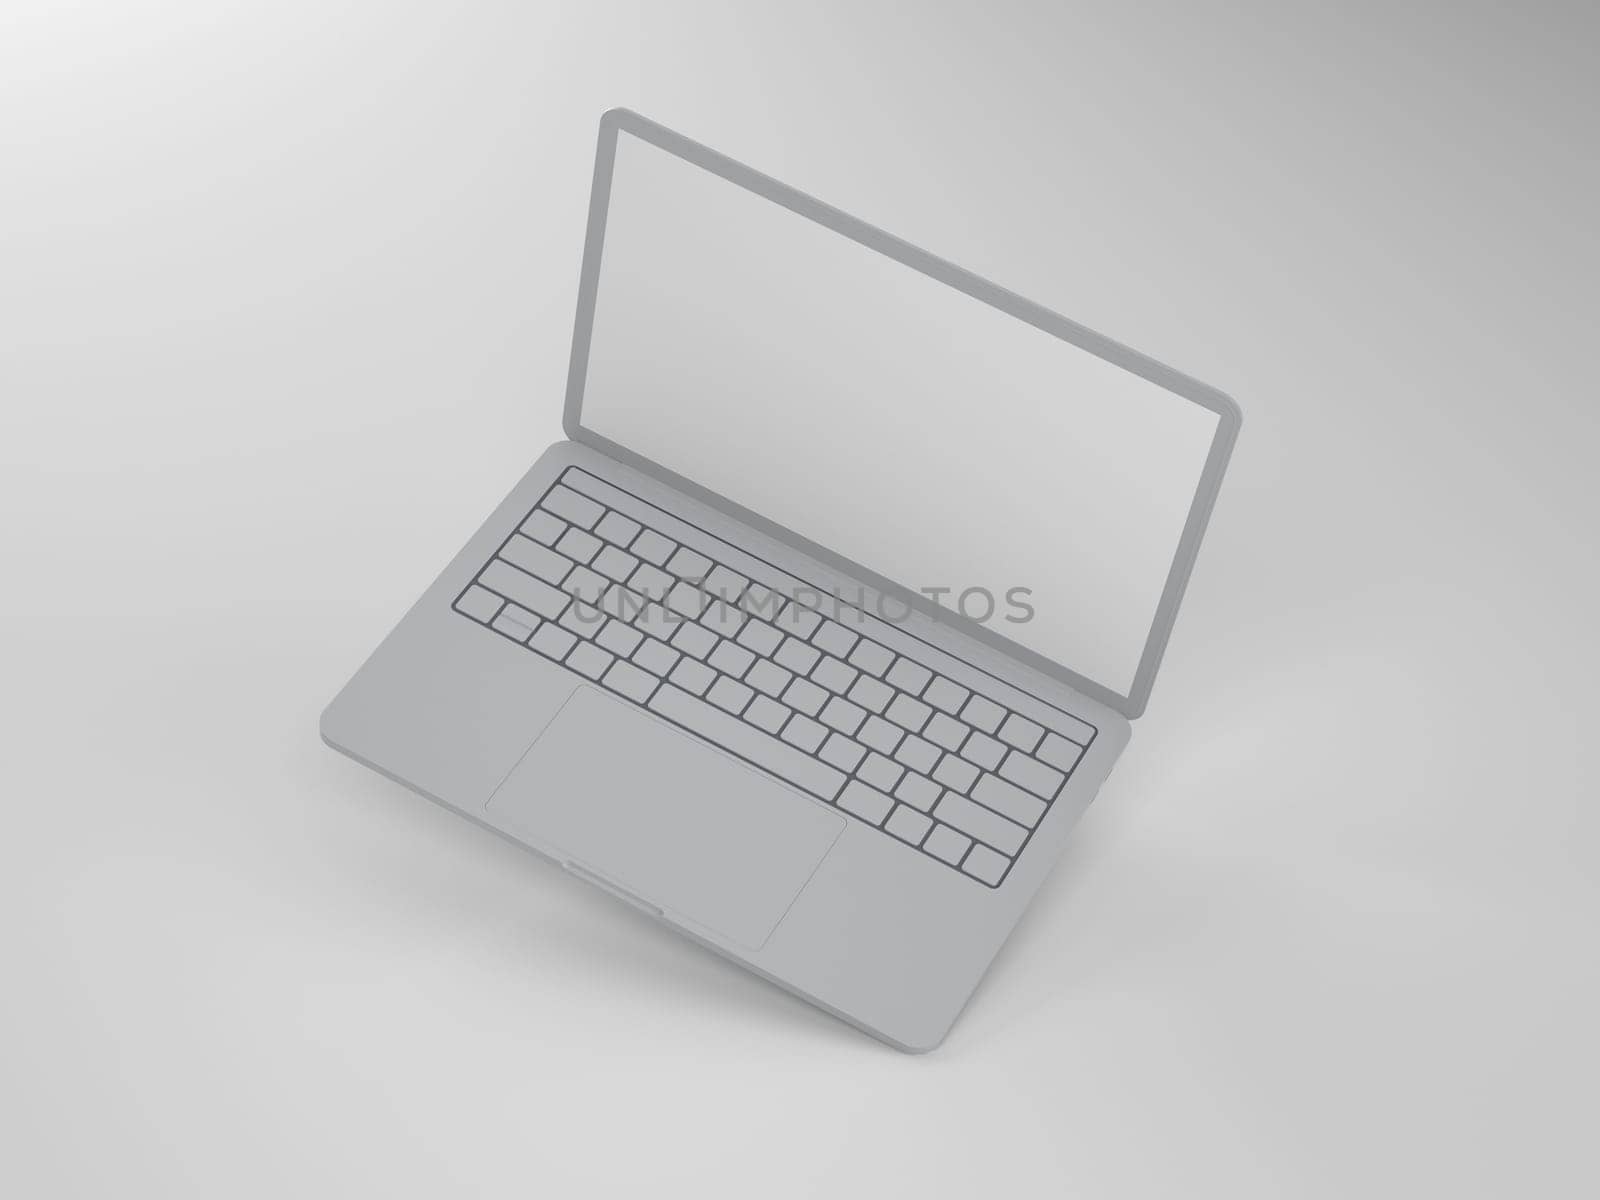 The raised top is an open thin gray laptop with a blank screen on a light background